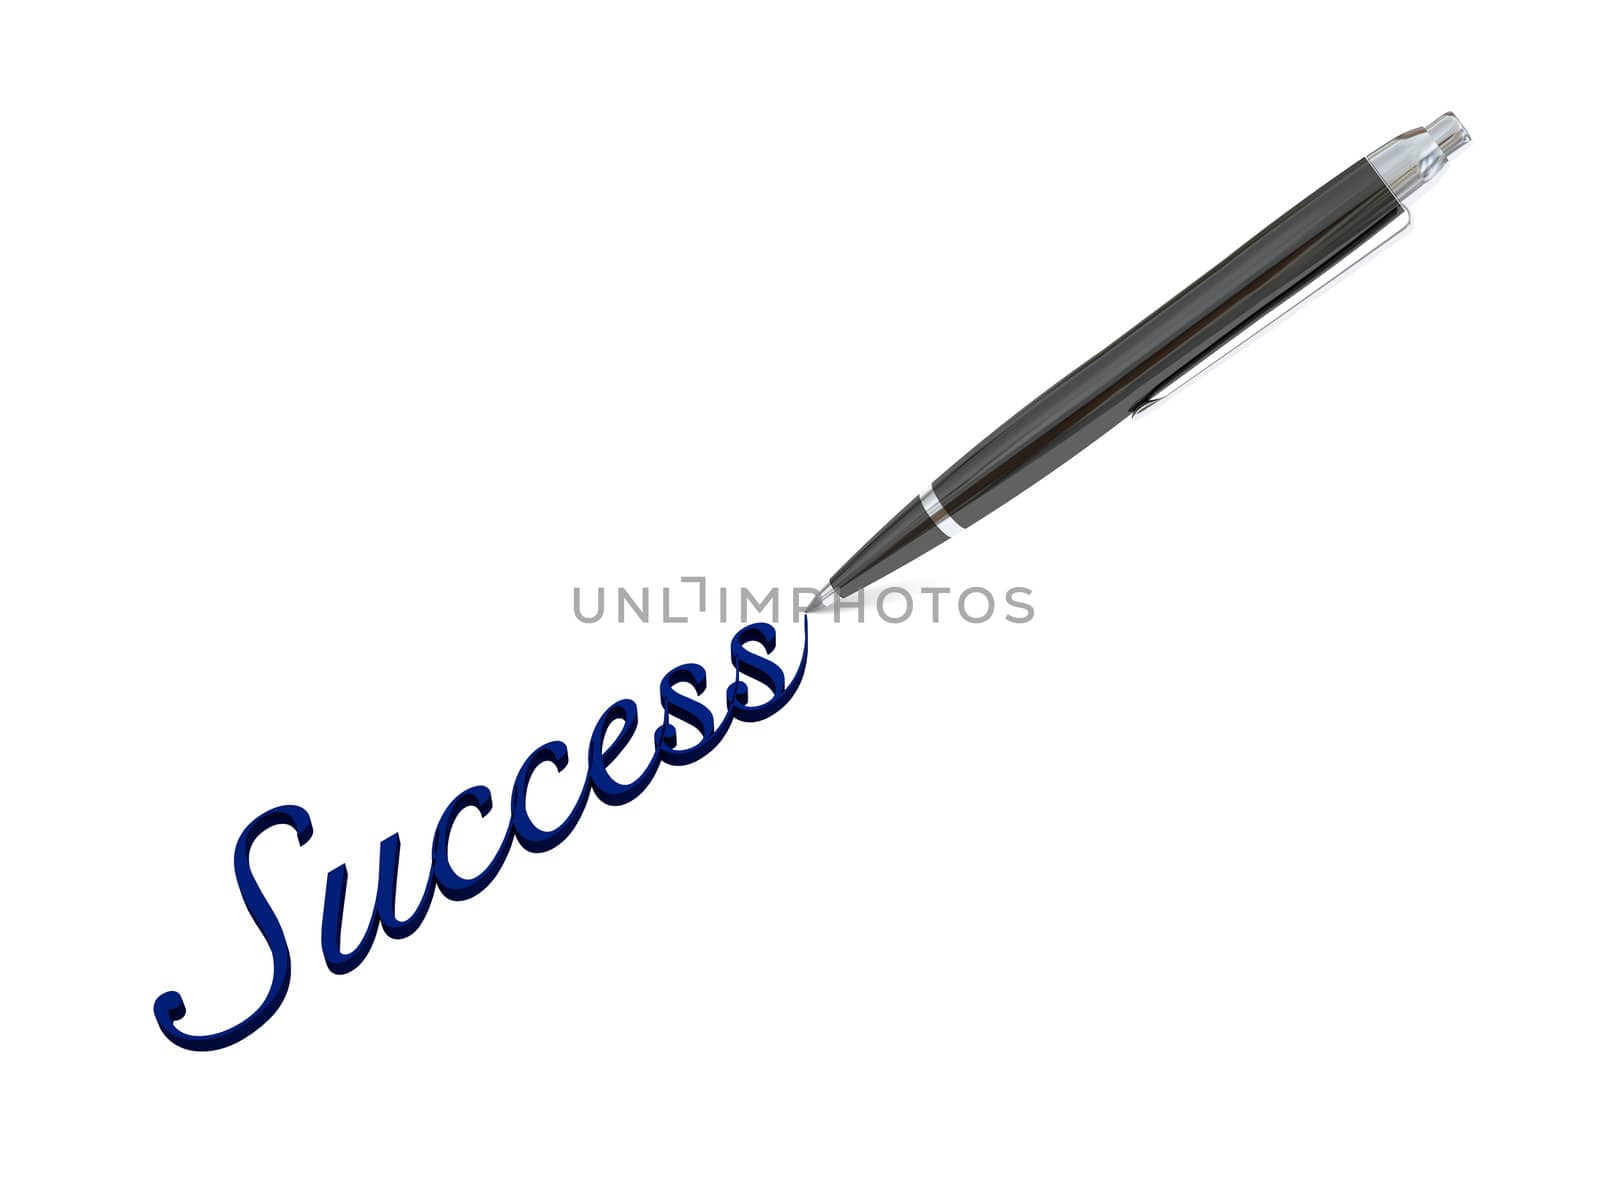 Writing success by Harvepino